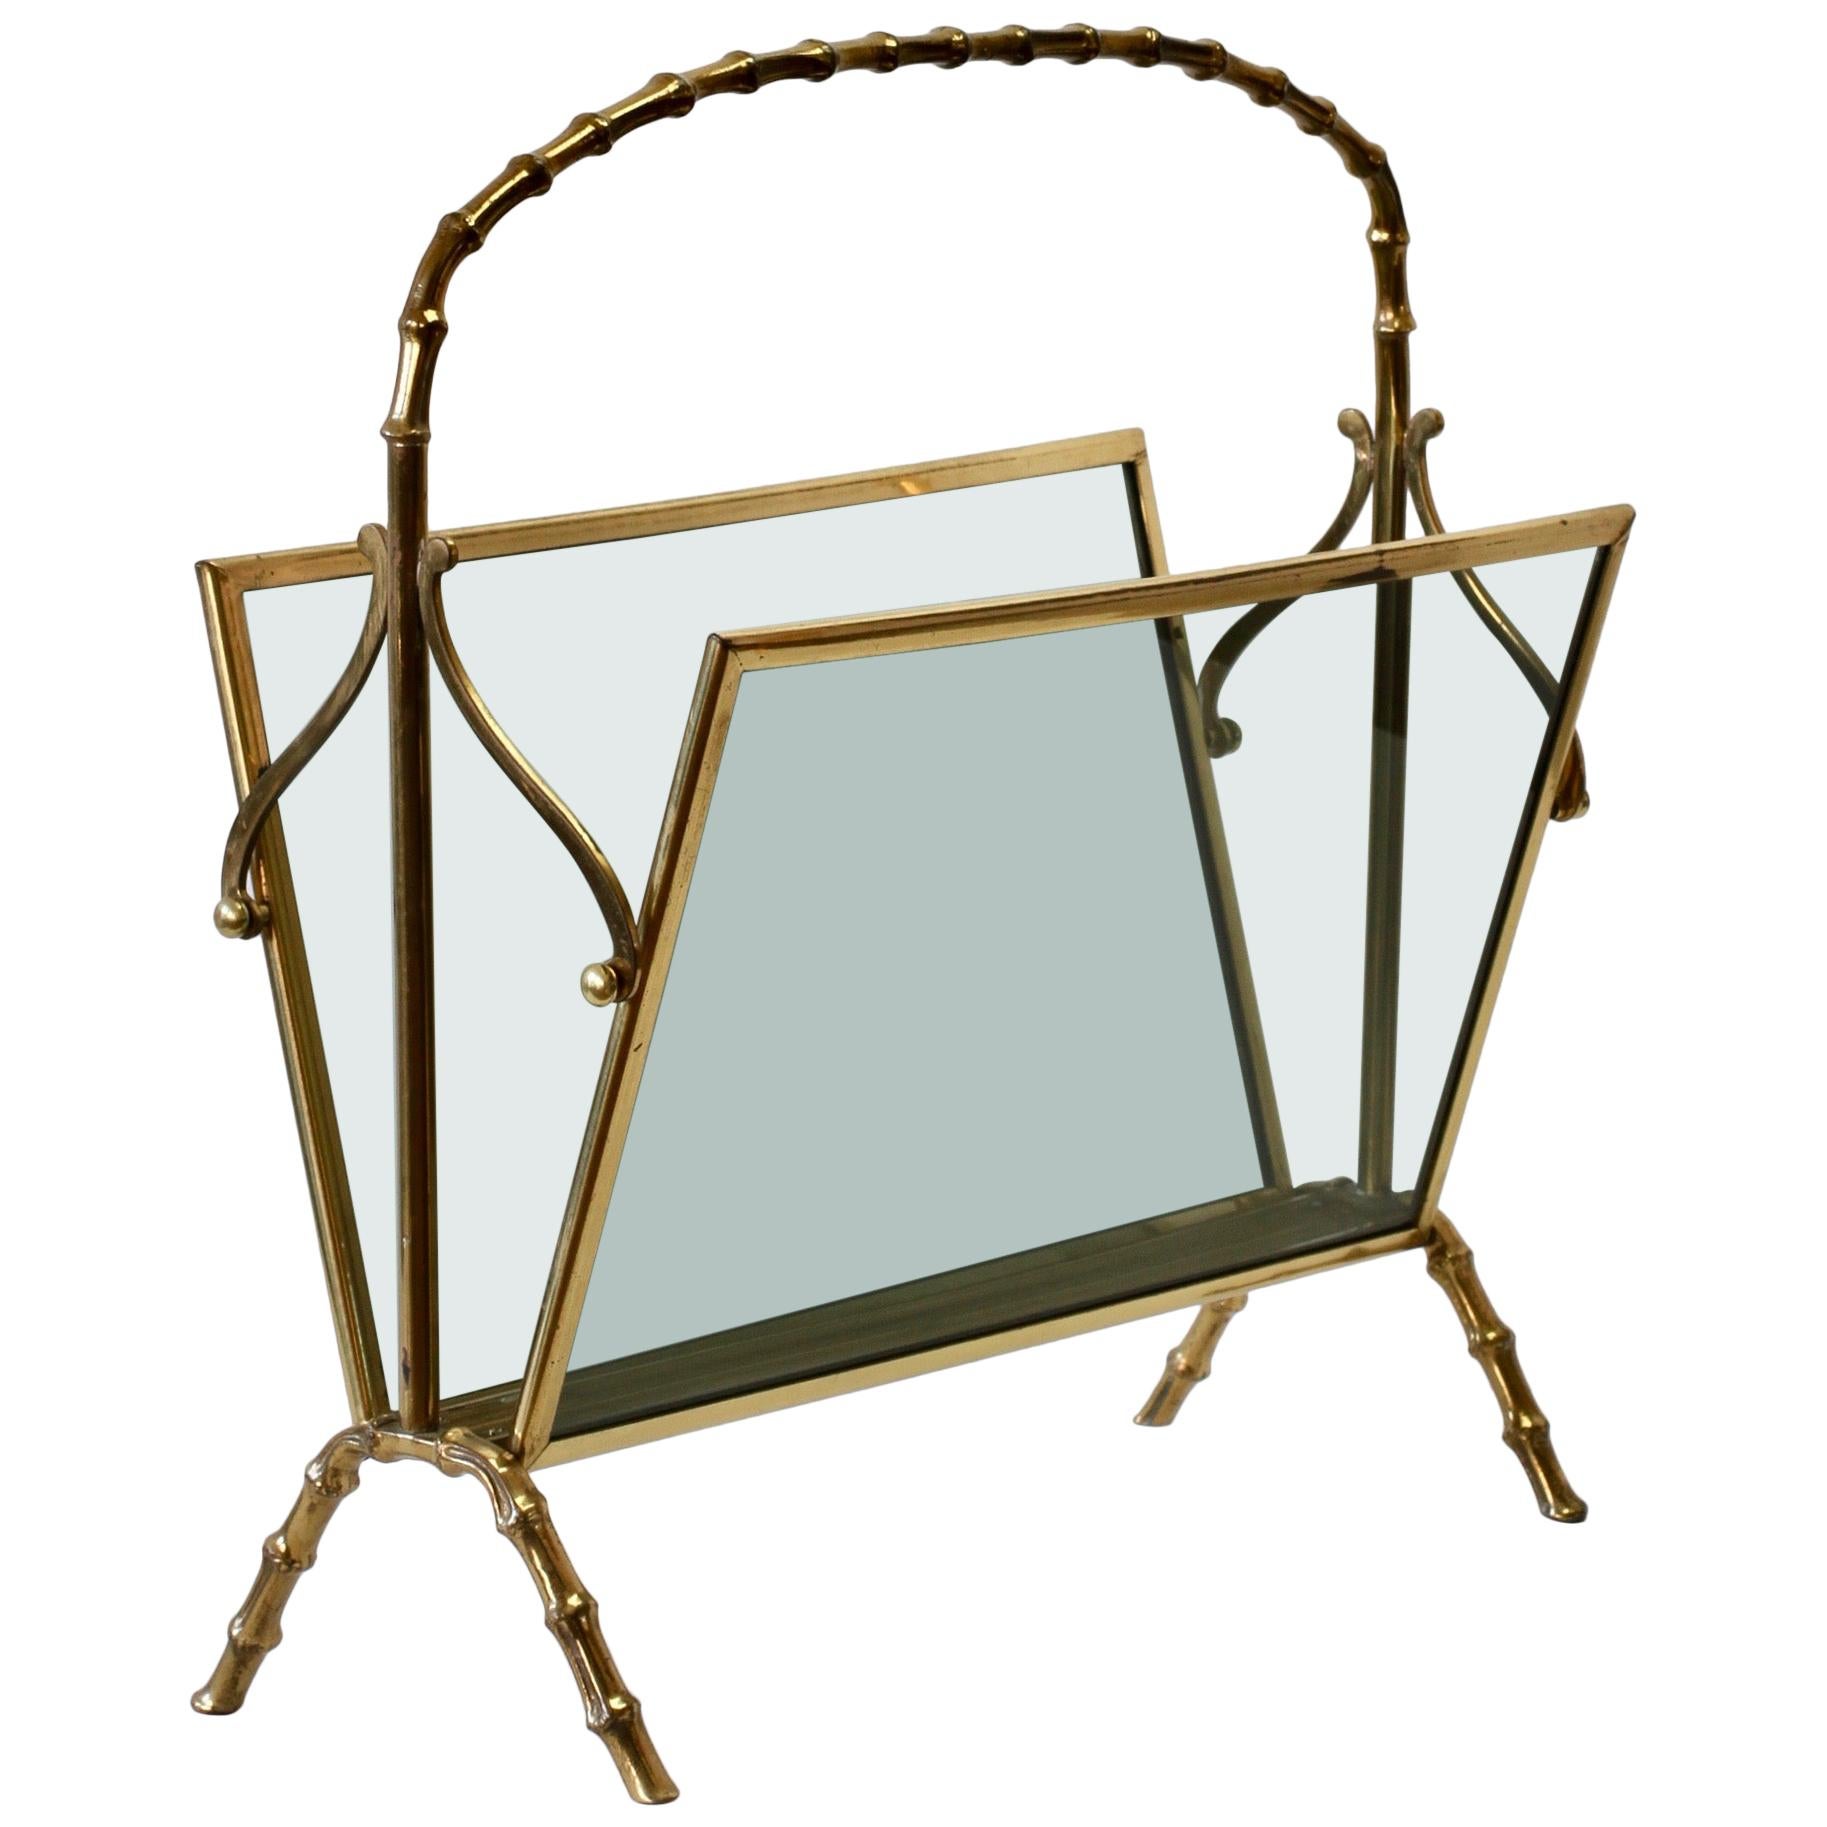 Maison Baguès Attributed Cast Brass Faux Bamboo Magazine Rack or Newspaper Stand